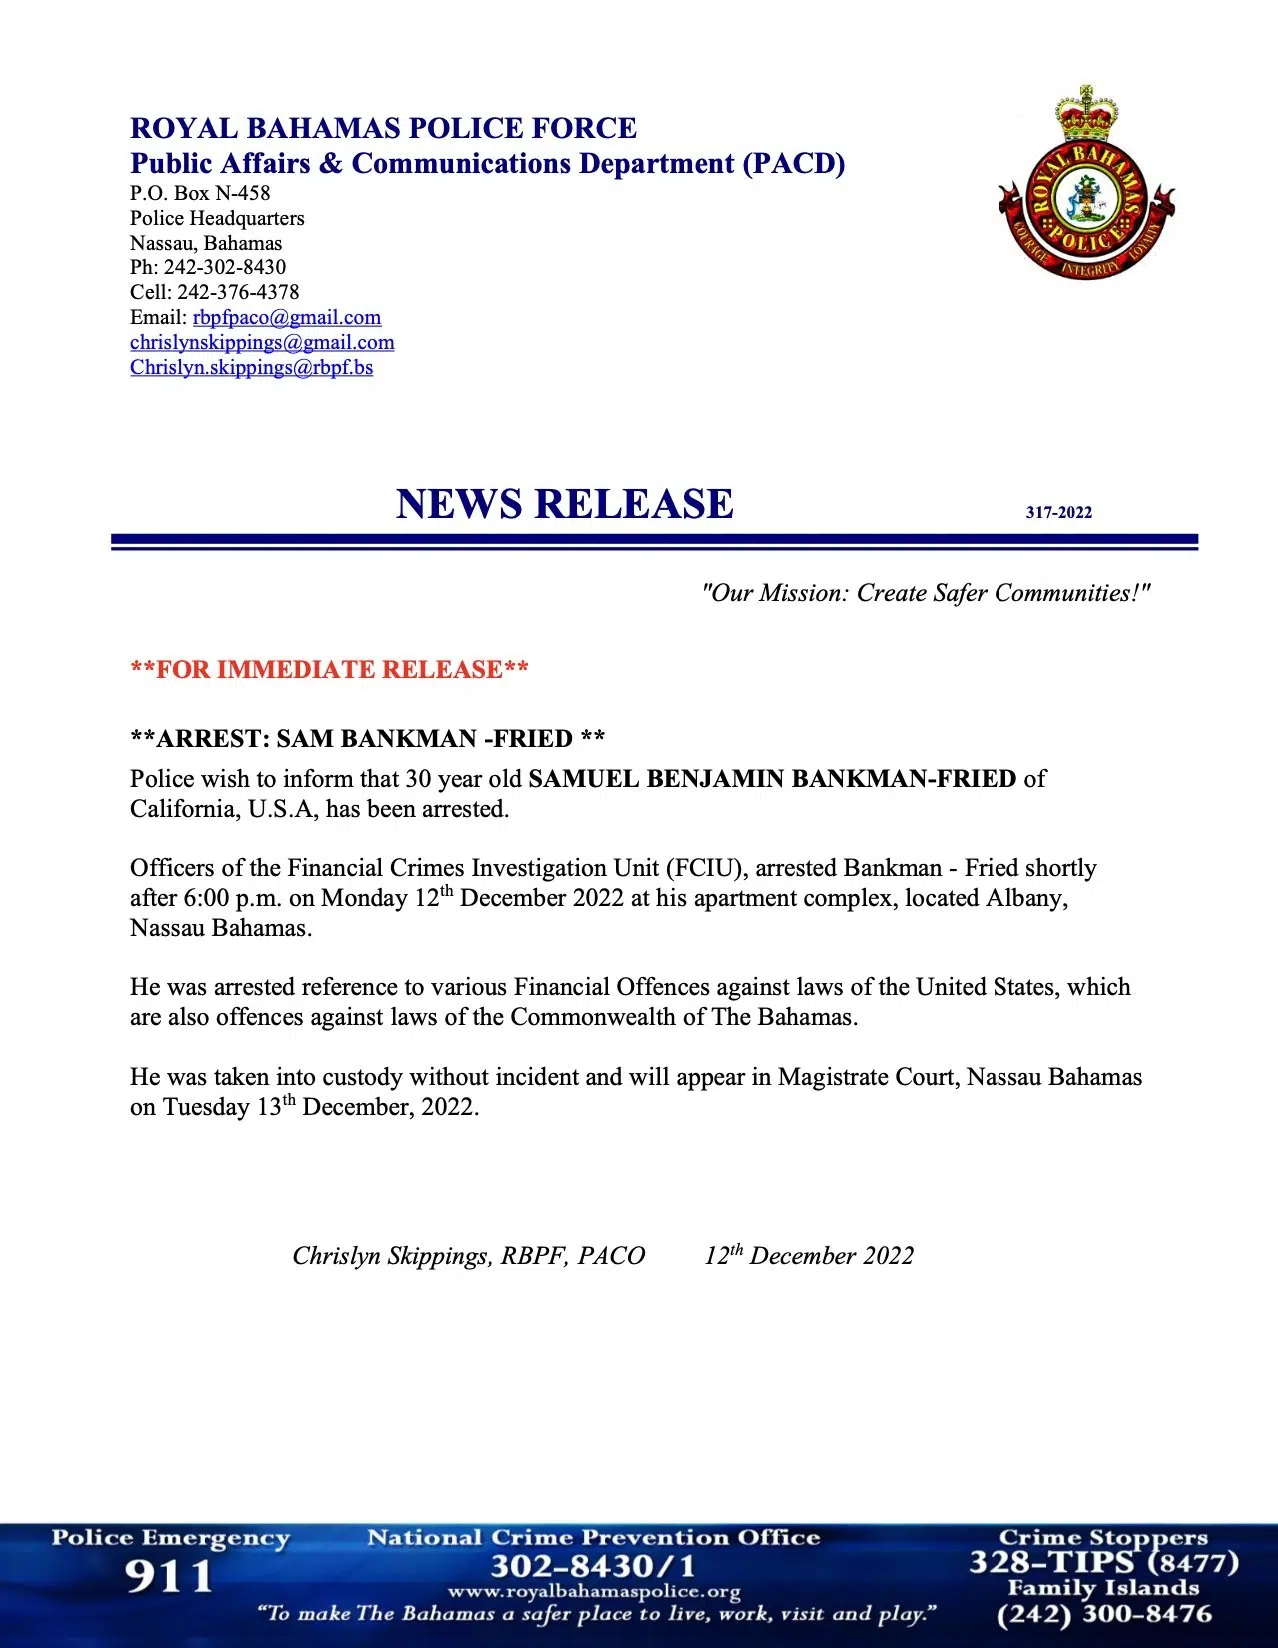 A Statement from the Royal Bahamas Police Force on the SBF's arrest